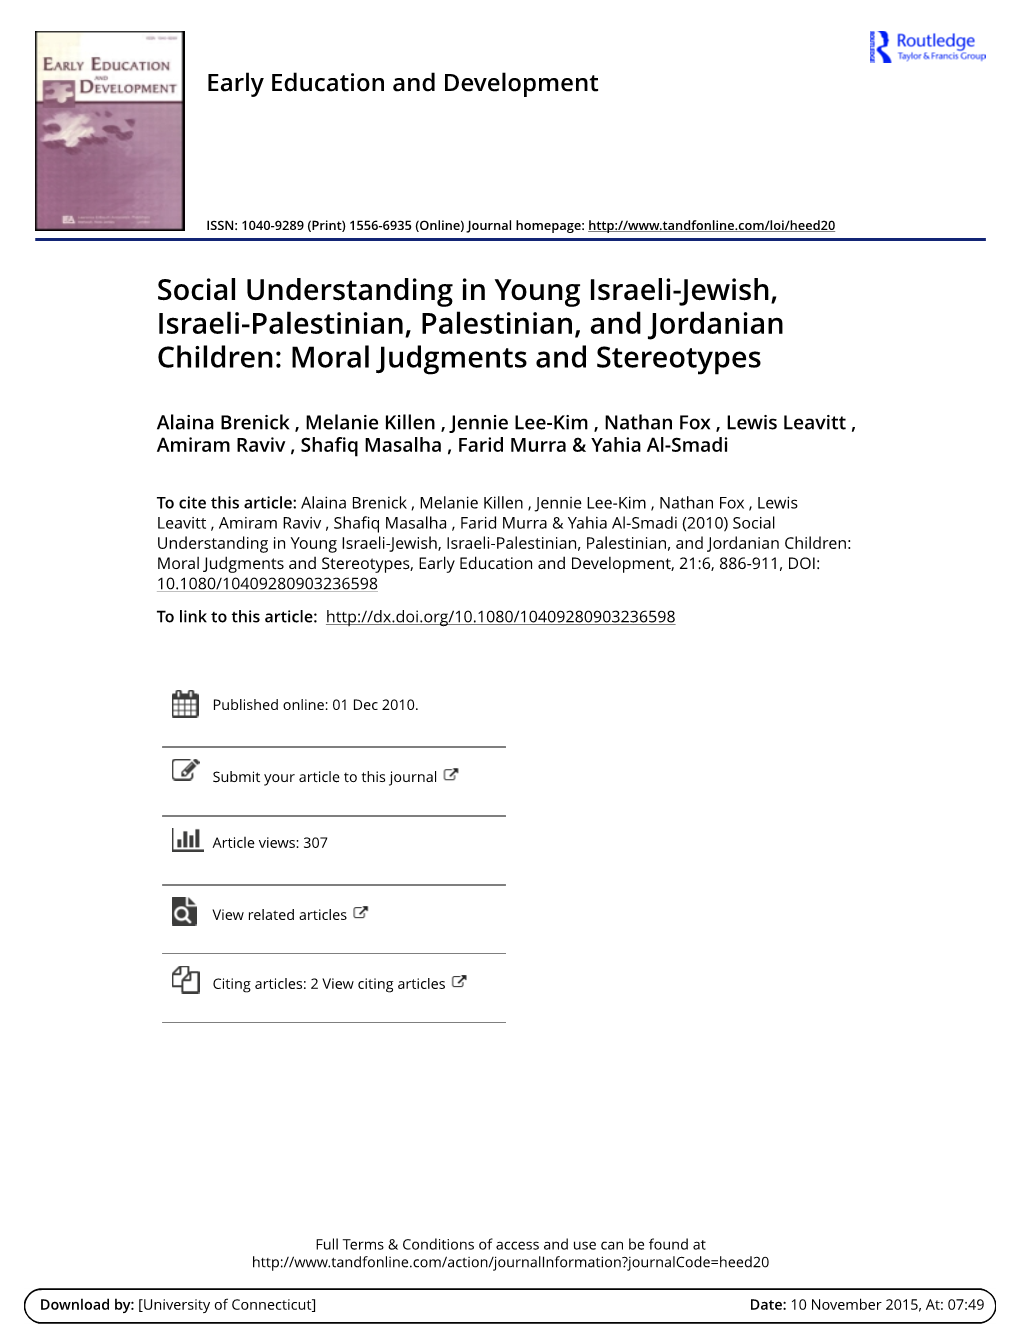 Social Understanding in Young Israeli-Jewish, Israeli-Palestinian, Palestinian, and Jordanian Children: Moral Judgments and Stereotypes